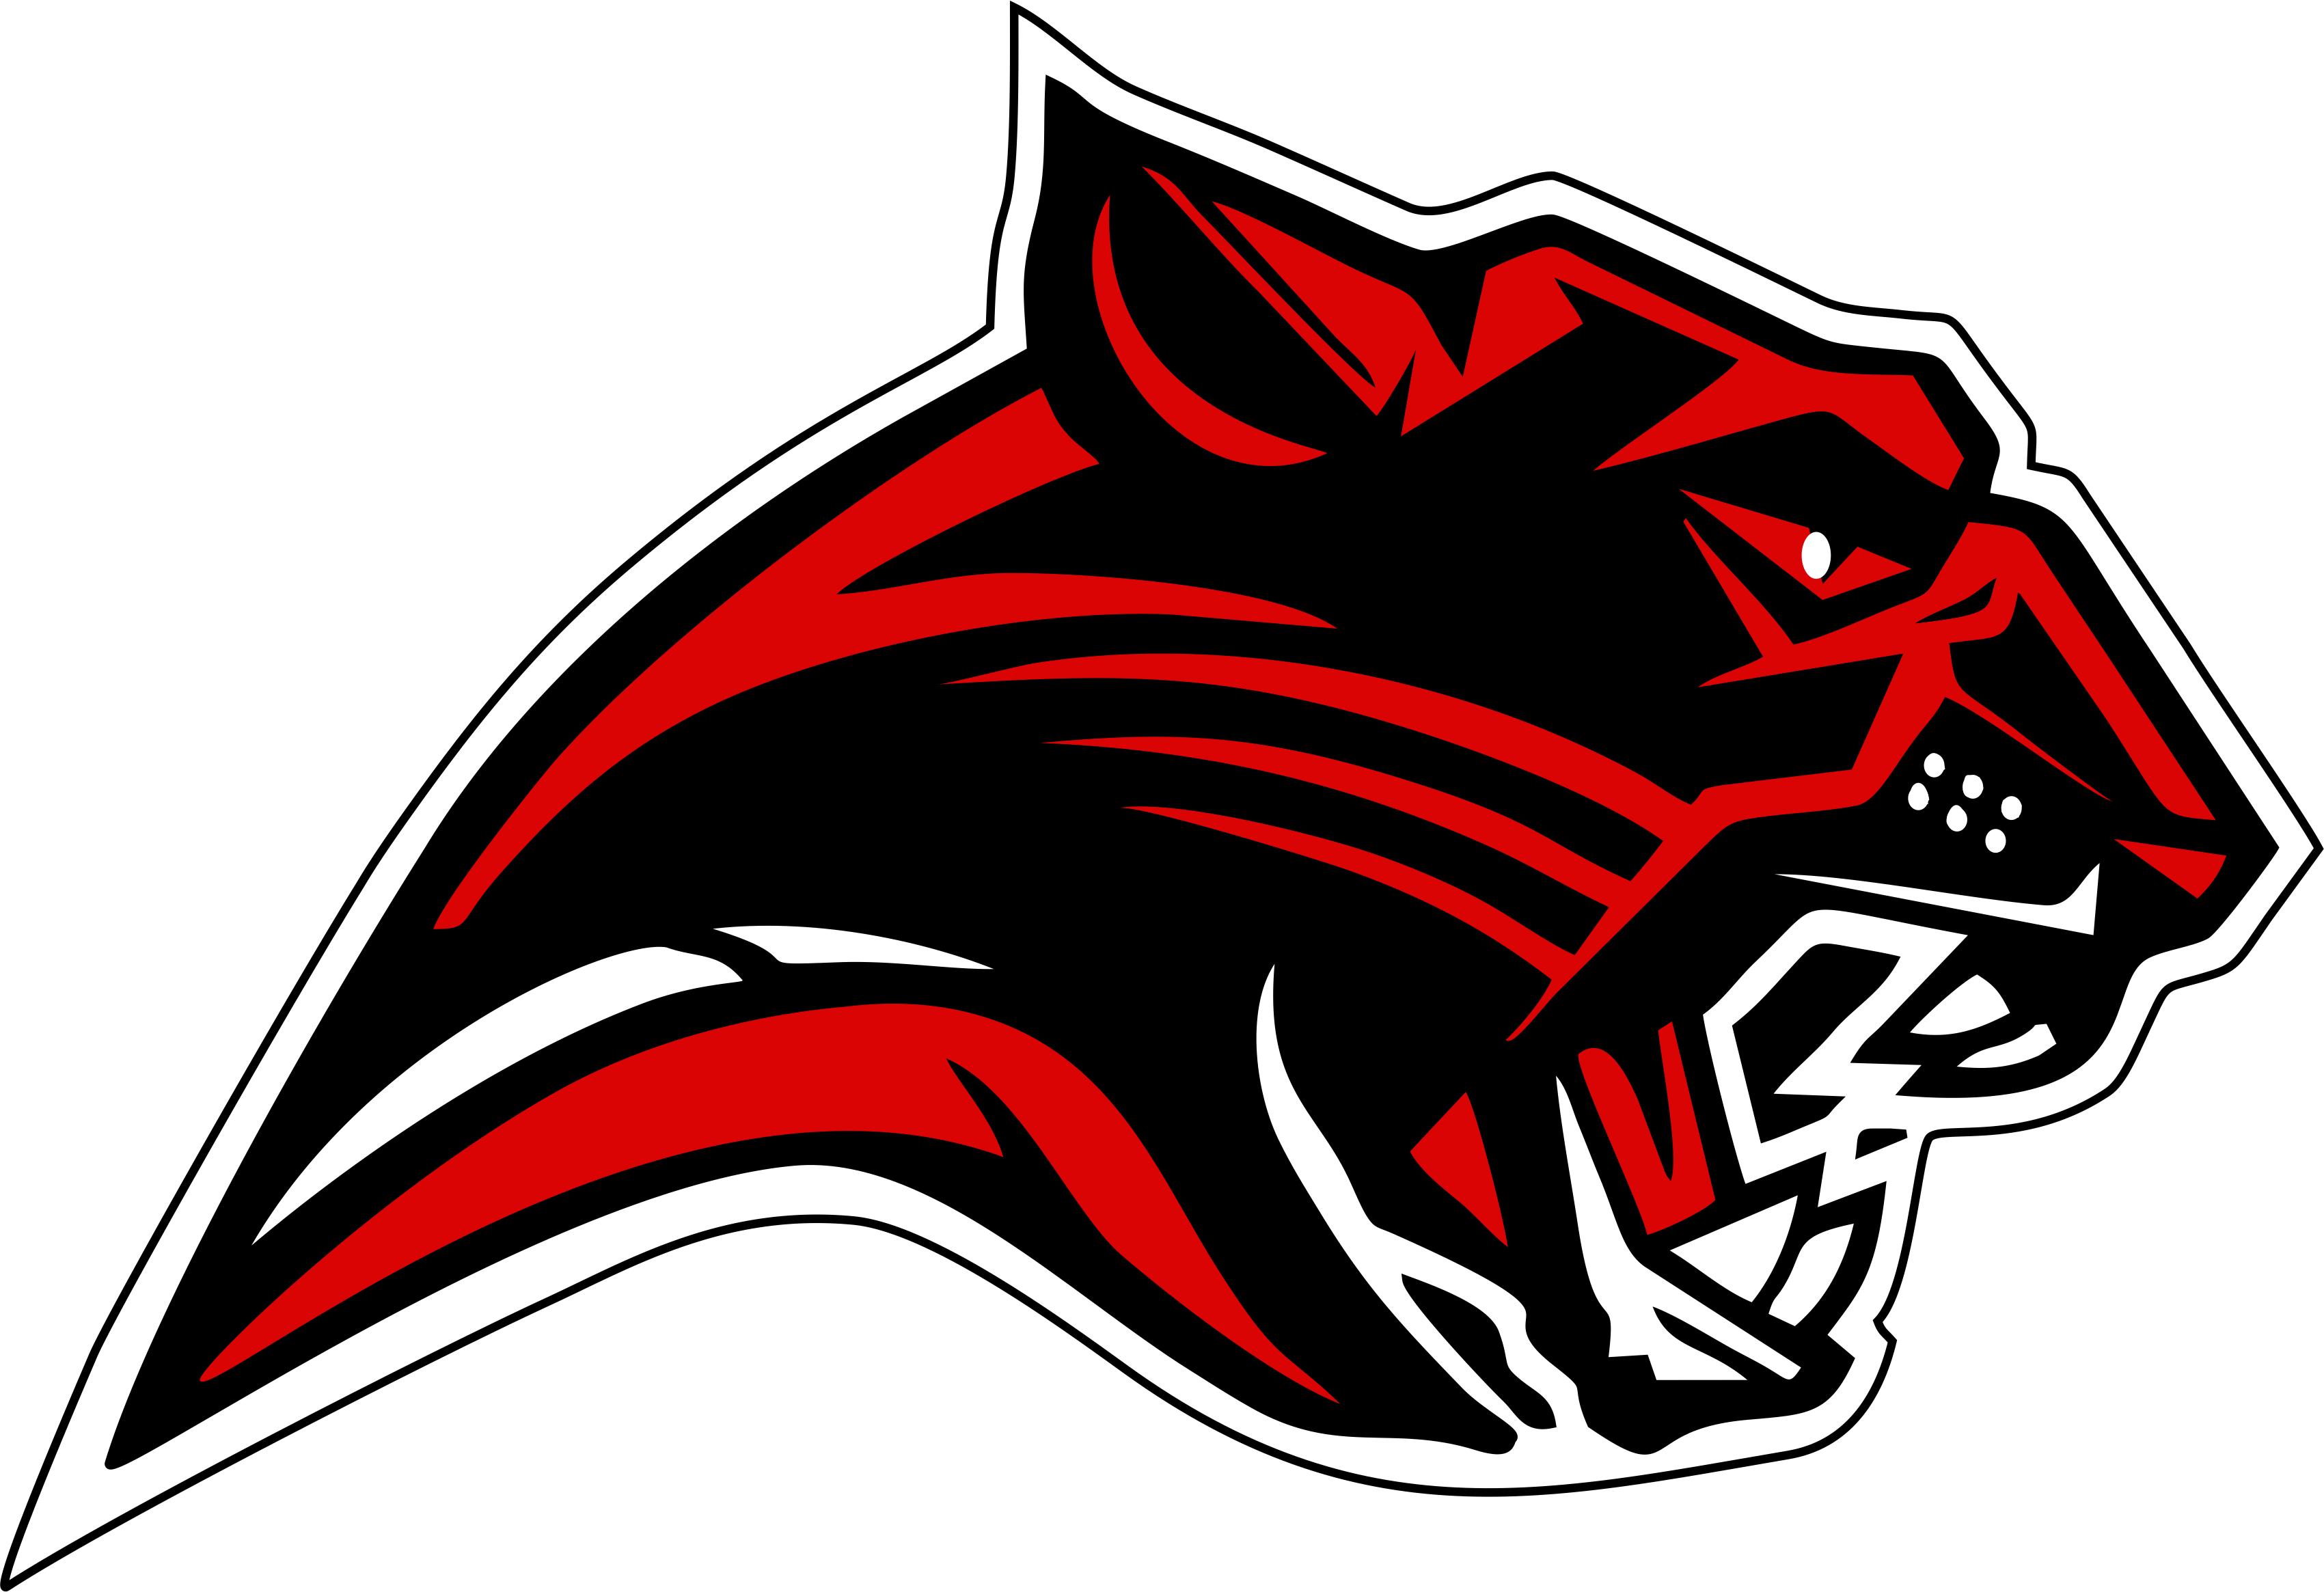 Powell Middle logo